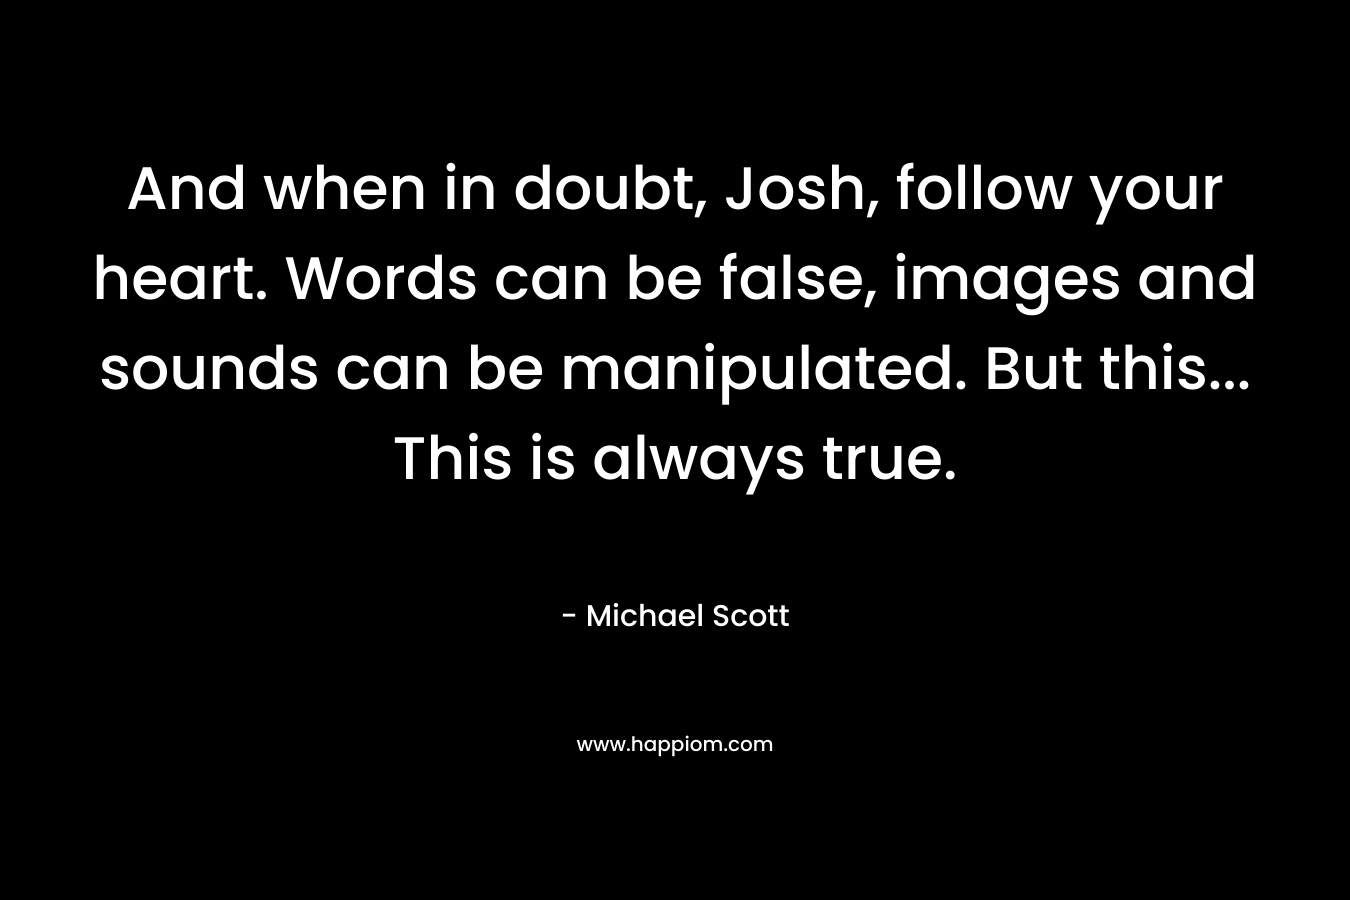 And when in doubt, Josh, follow your heart. Words can be false, images and sounds can be manipulated. But this… This is always true. – Michael Scott